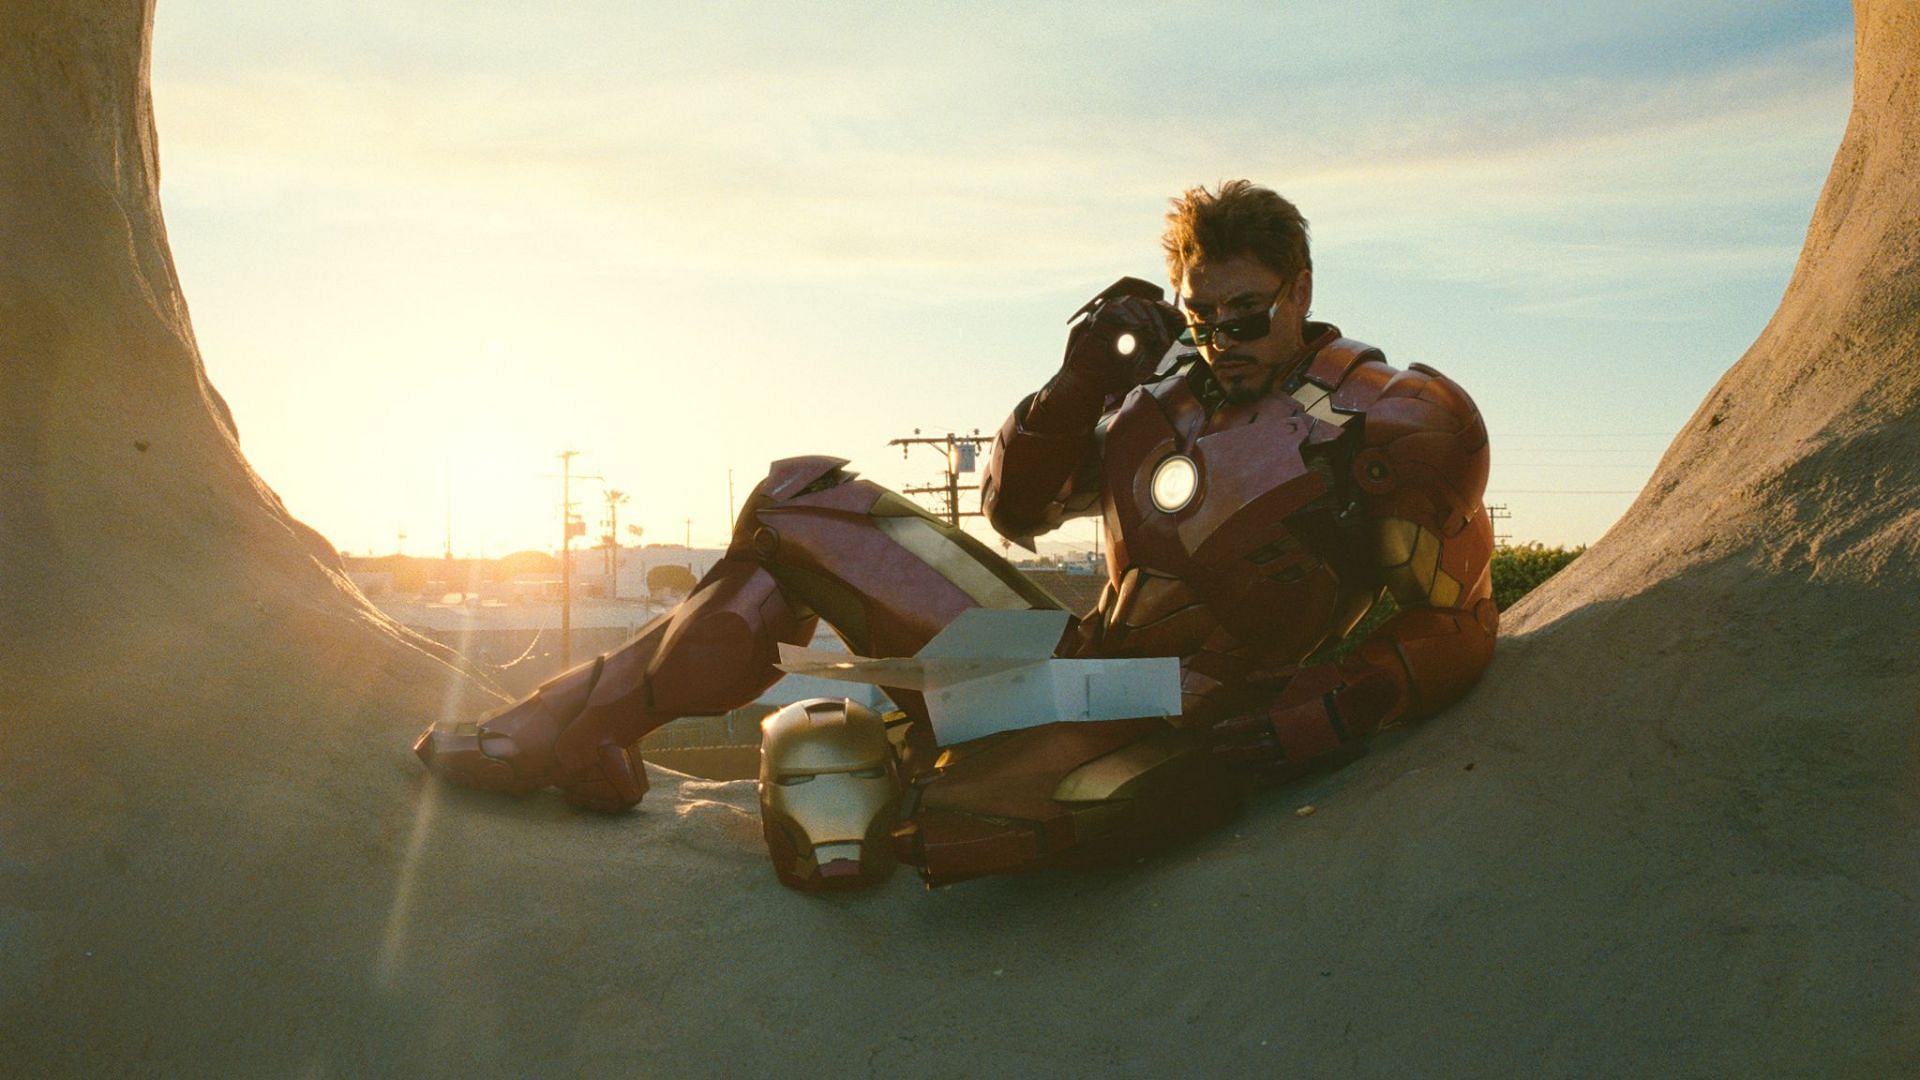 Fan reactions to the possibility of Robert Downey Jr.&#039;s Iron Man return - love it or hate it? (Image via Marvel Studios)